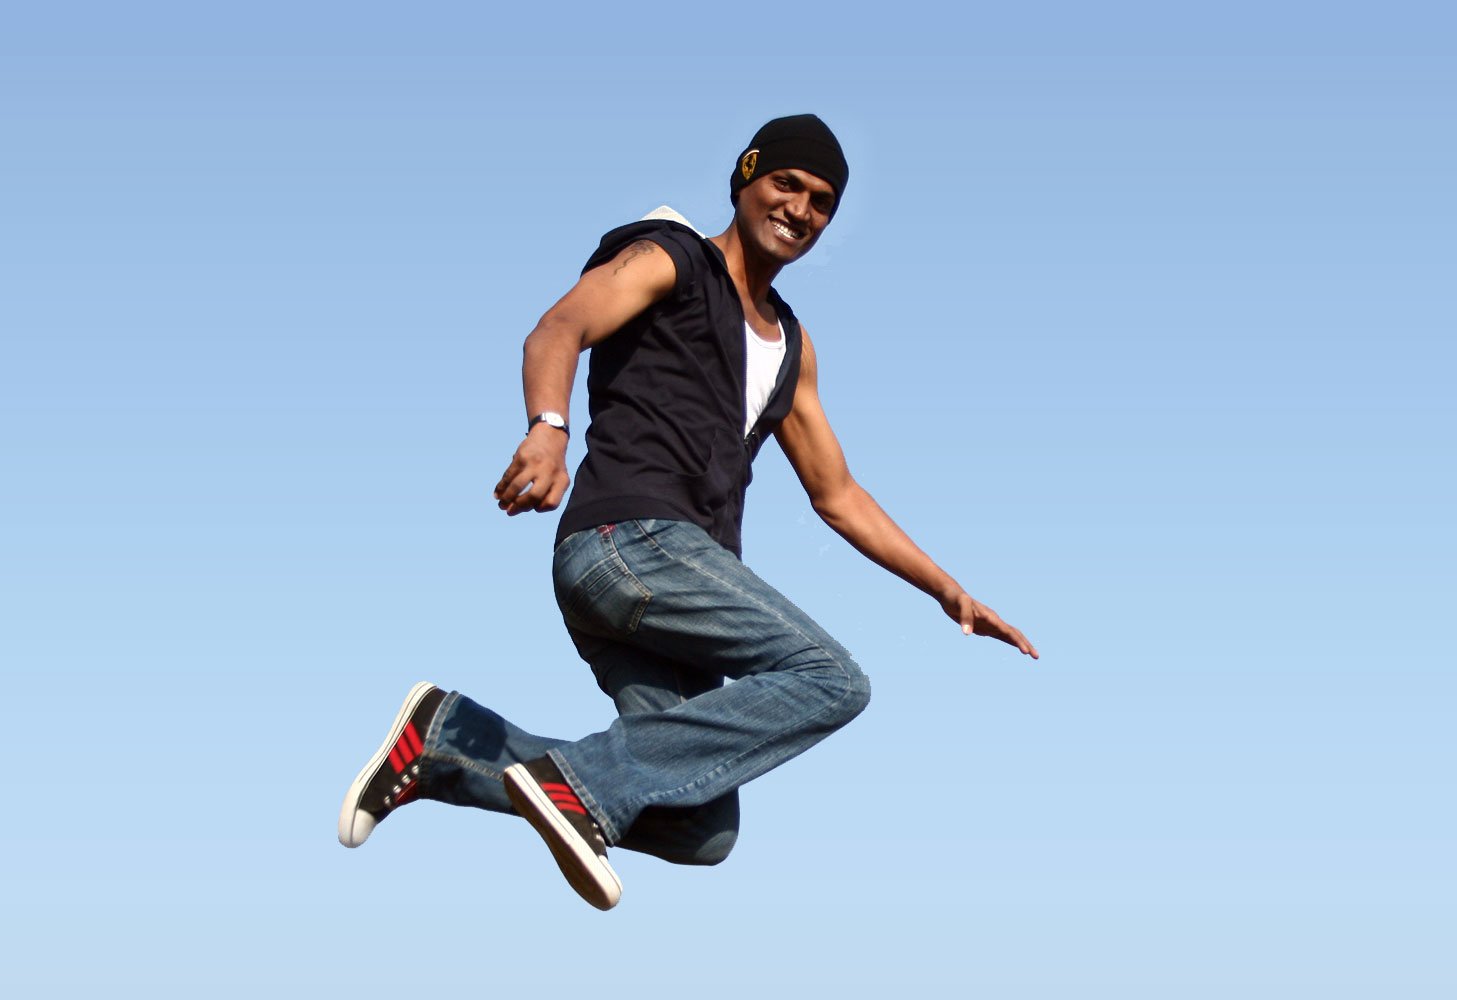 a man with a black shirt is jumping into the air